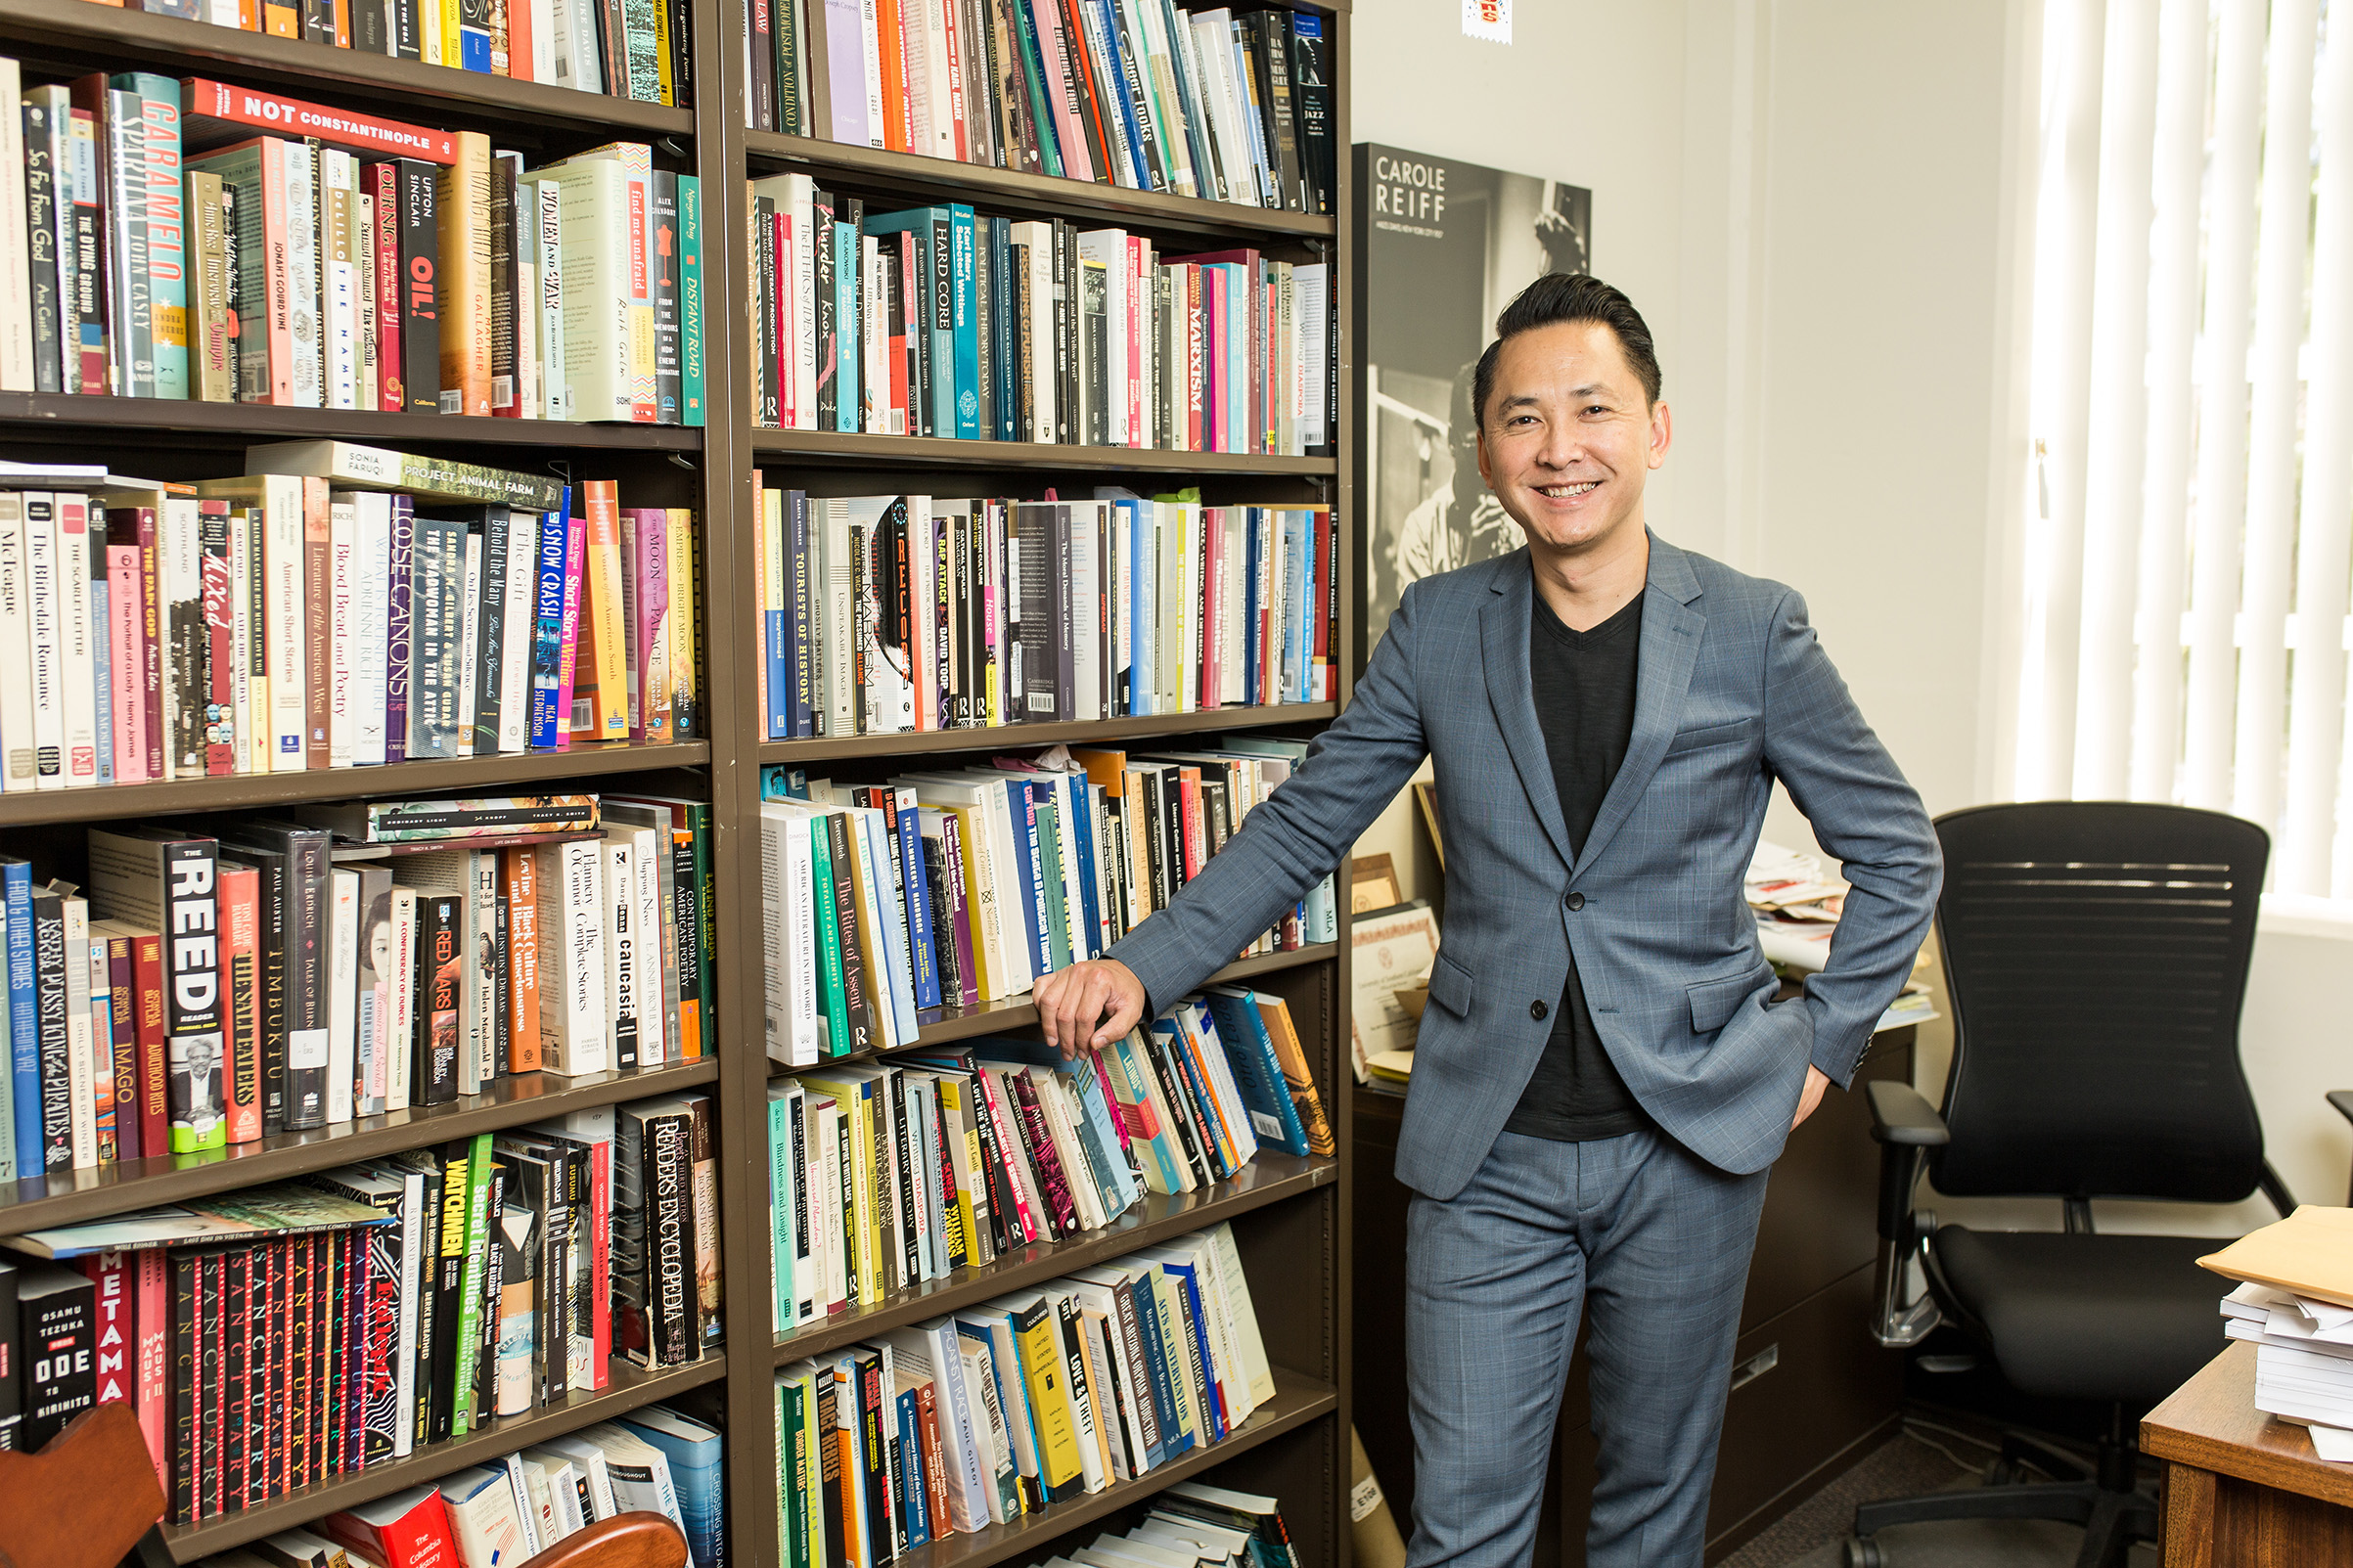 Viet Thanh Nguyen, 2017 MacArthur Fellow, University of [f500link]Southern[/f500link] California, Los Angeles, September 23, 2017. (John D. and Catherine T. MacArthur Foundation)